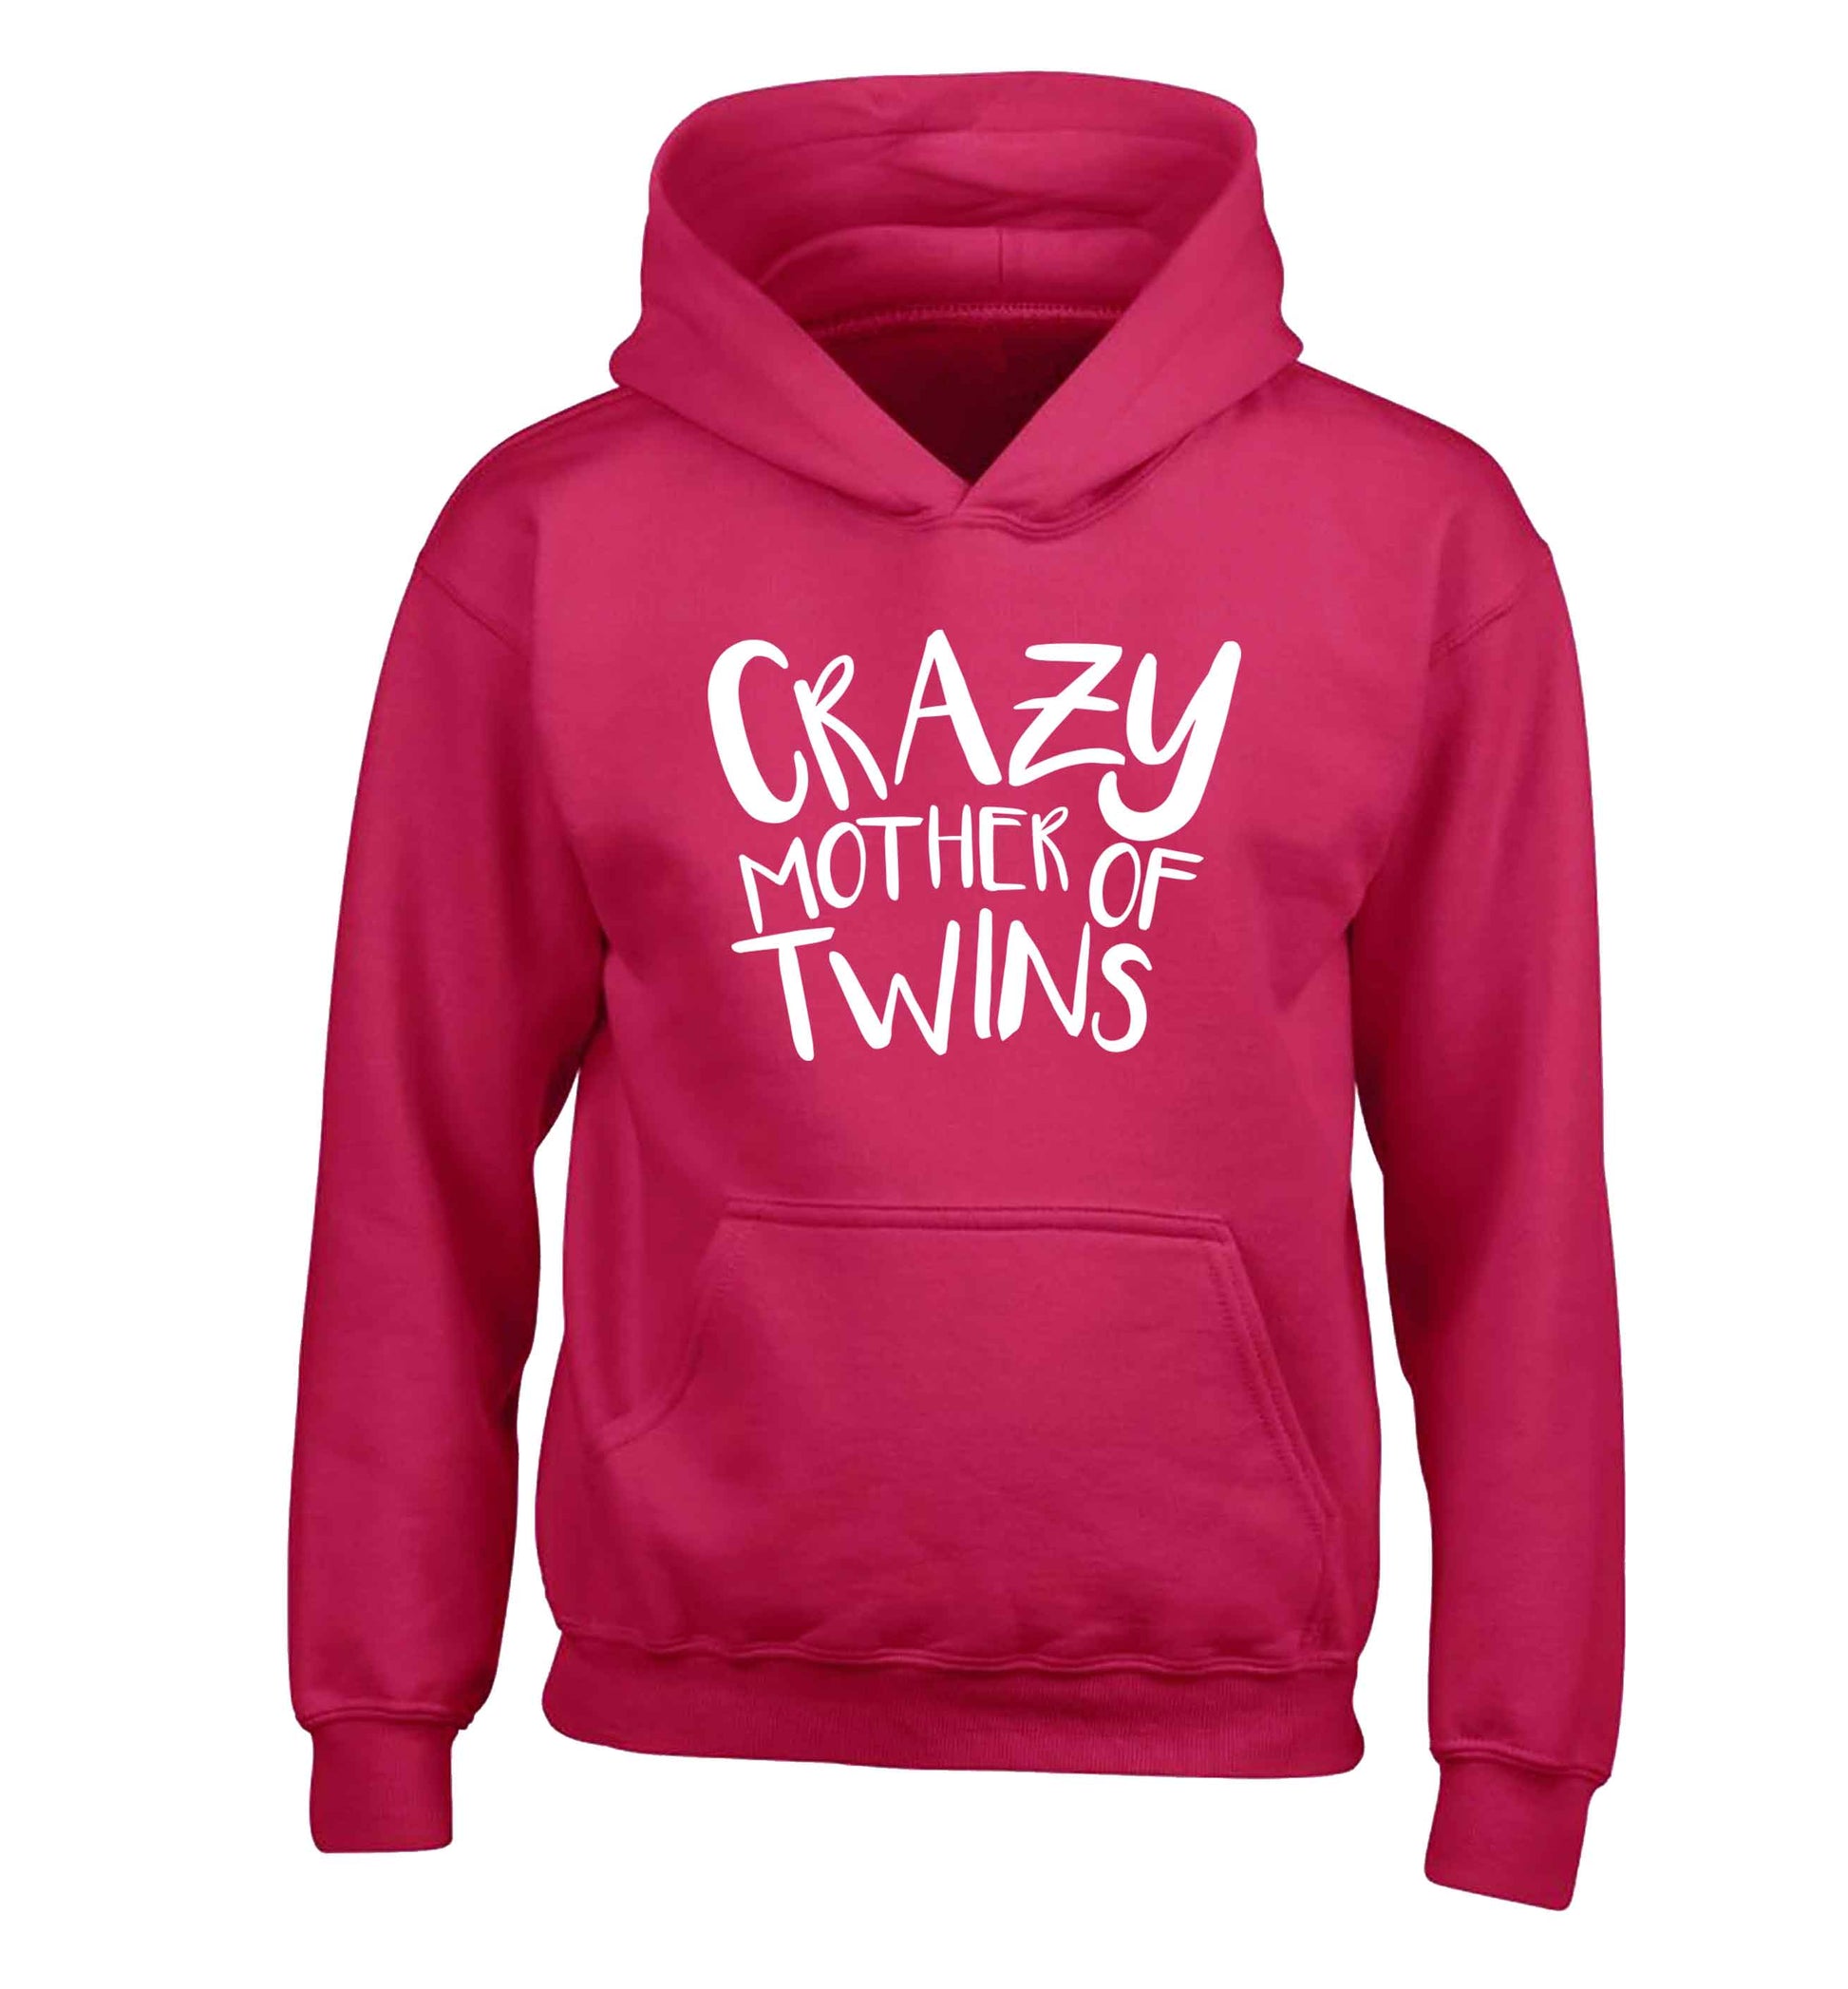 Crazy mother of twins children's pink hoodie 12-13 Years